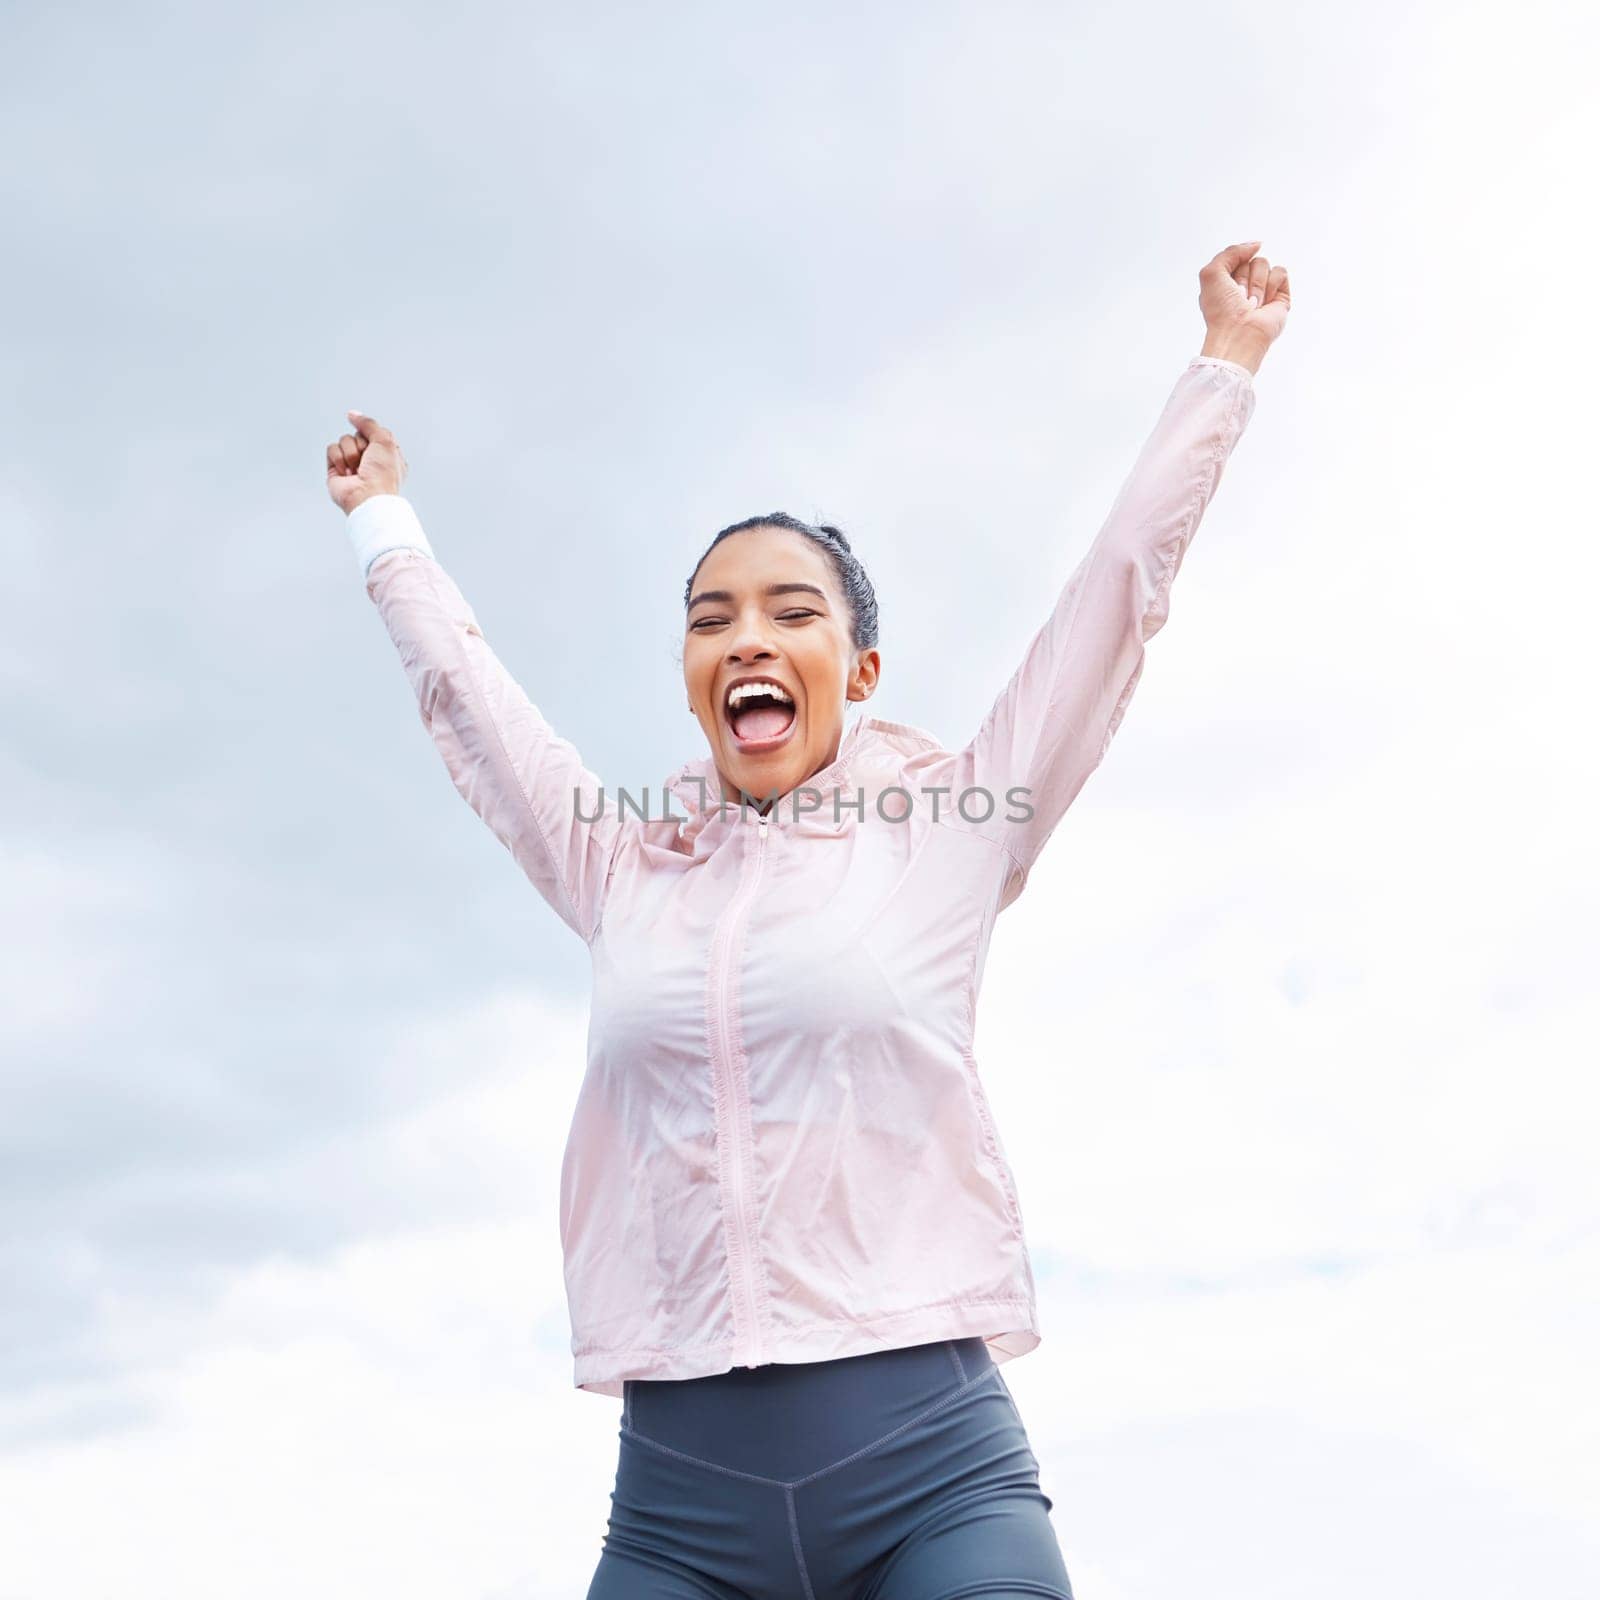 Happy woman, fitness success and achievement, freedom and motivation of goals, hope and wellness on sky background. Smile sports female arms up for celebration, winner pride and inspiration outdoors.